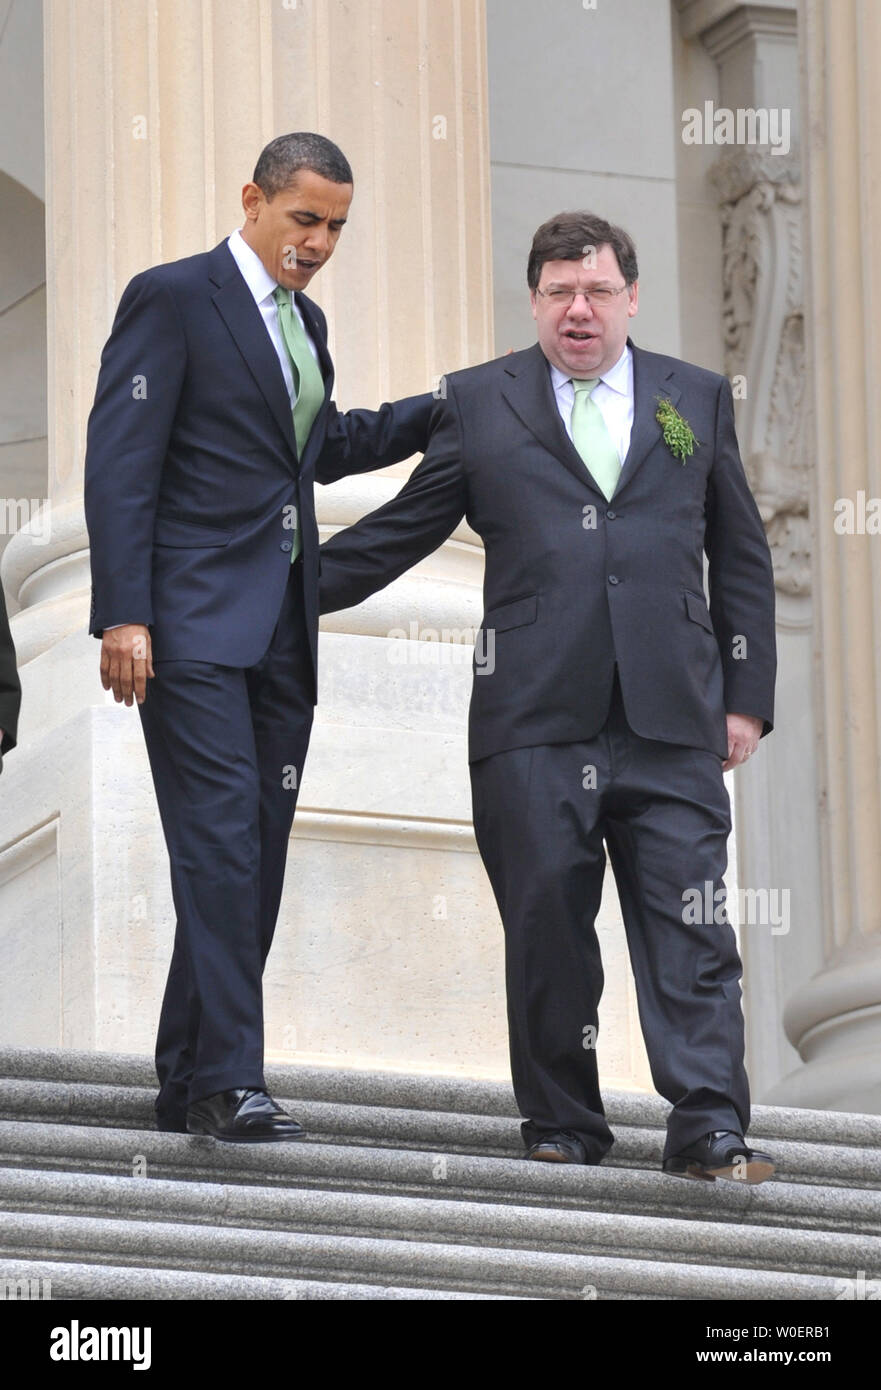 U.S. President Barack Obama (L) walks with the Irish Taoiseach Brian Cowen after a St. Patrick's Day Luncheon, hosted by Speaker of the House Nancy Pelsoi, on Capitol Hill in Washington on March 17, 2009. (UPI Photo/Kevin Dietsch) Stock Photo